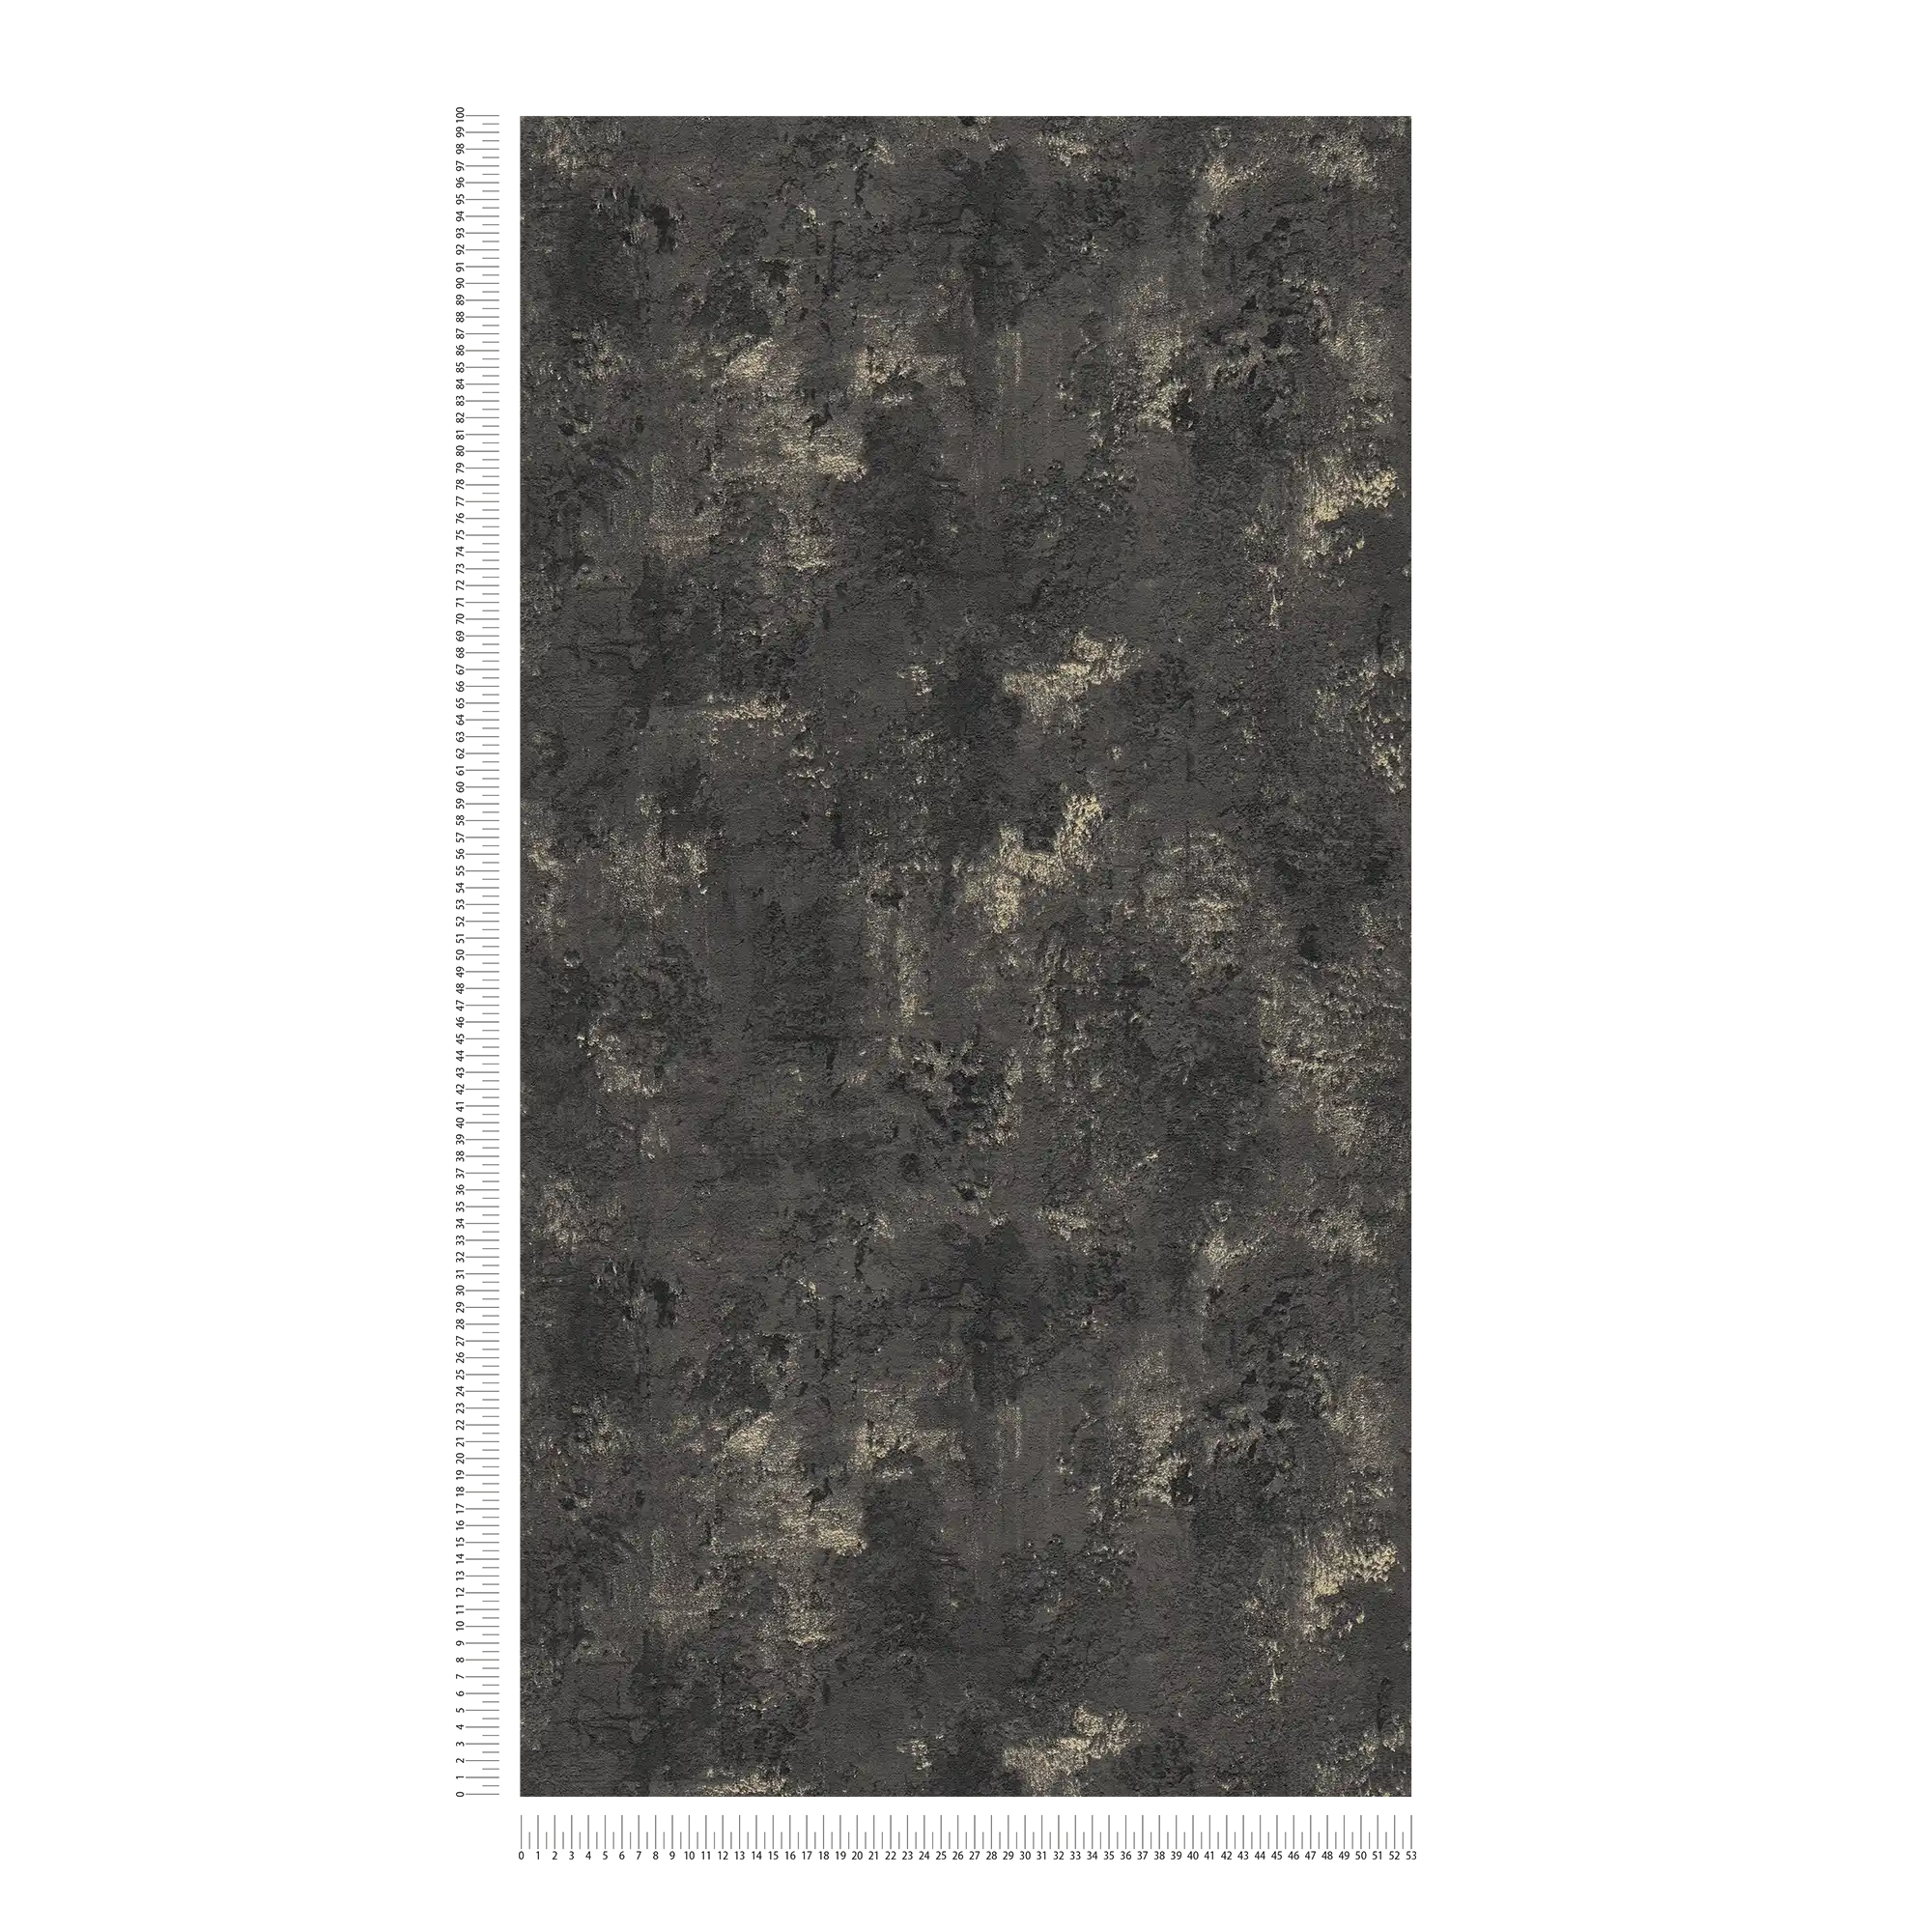             Black textured wallpaper with rustic concrete look
        